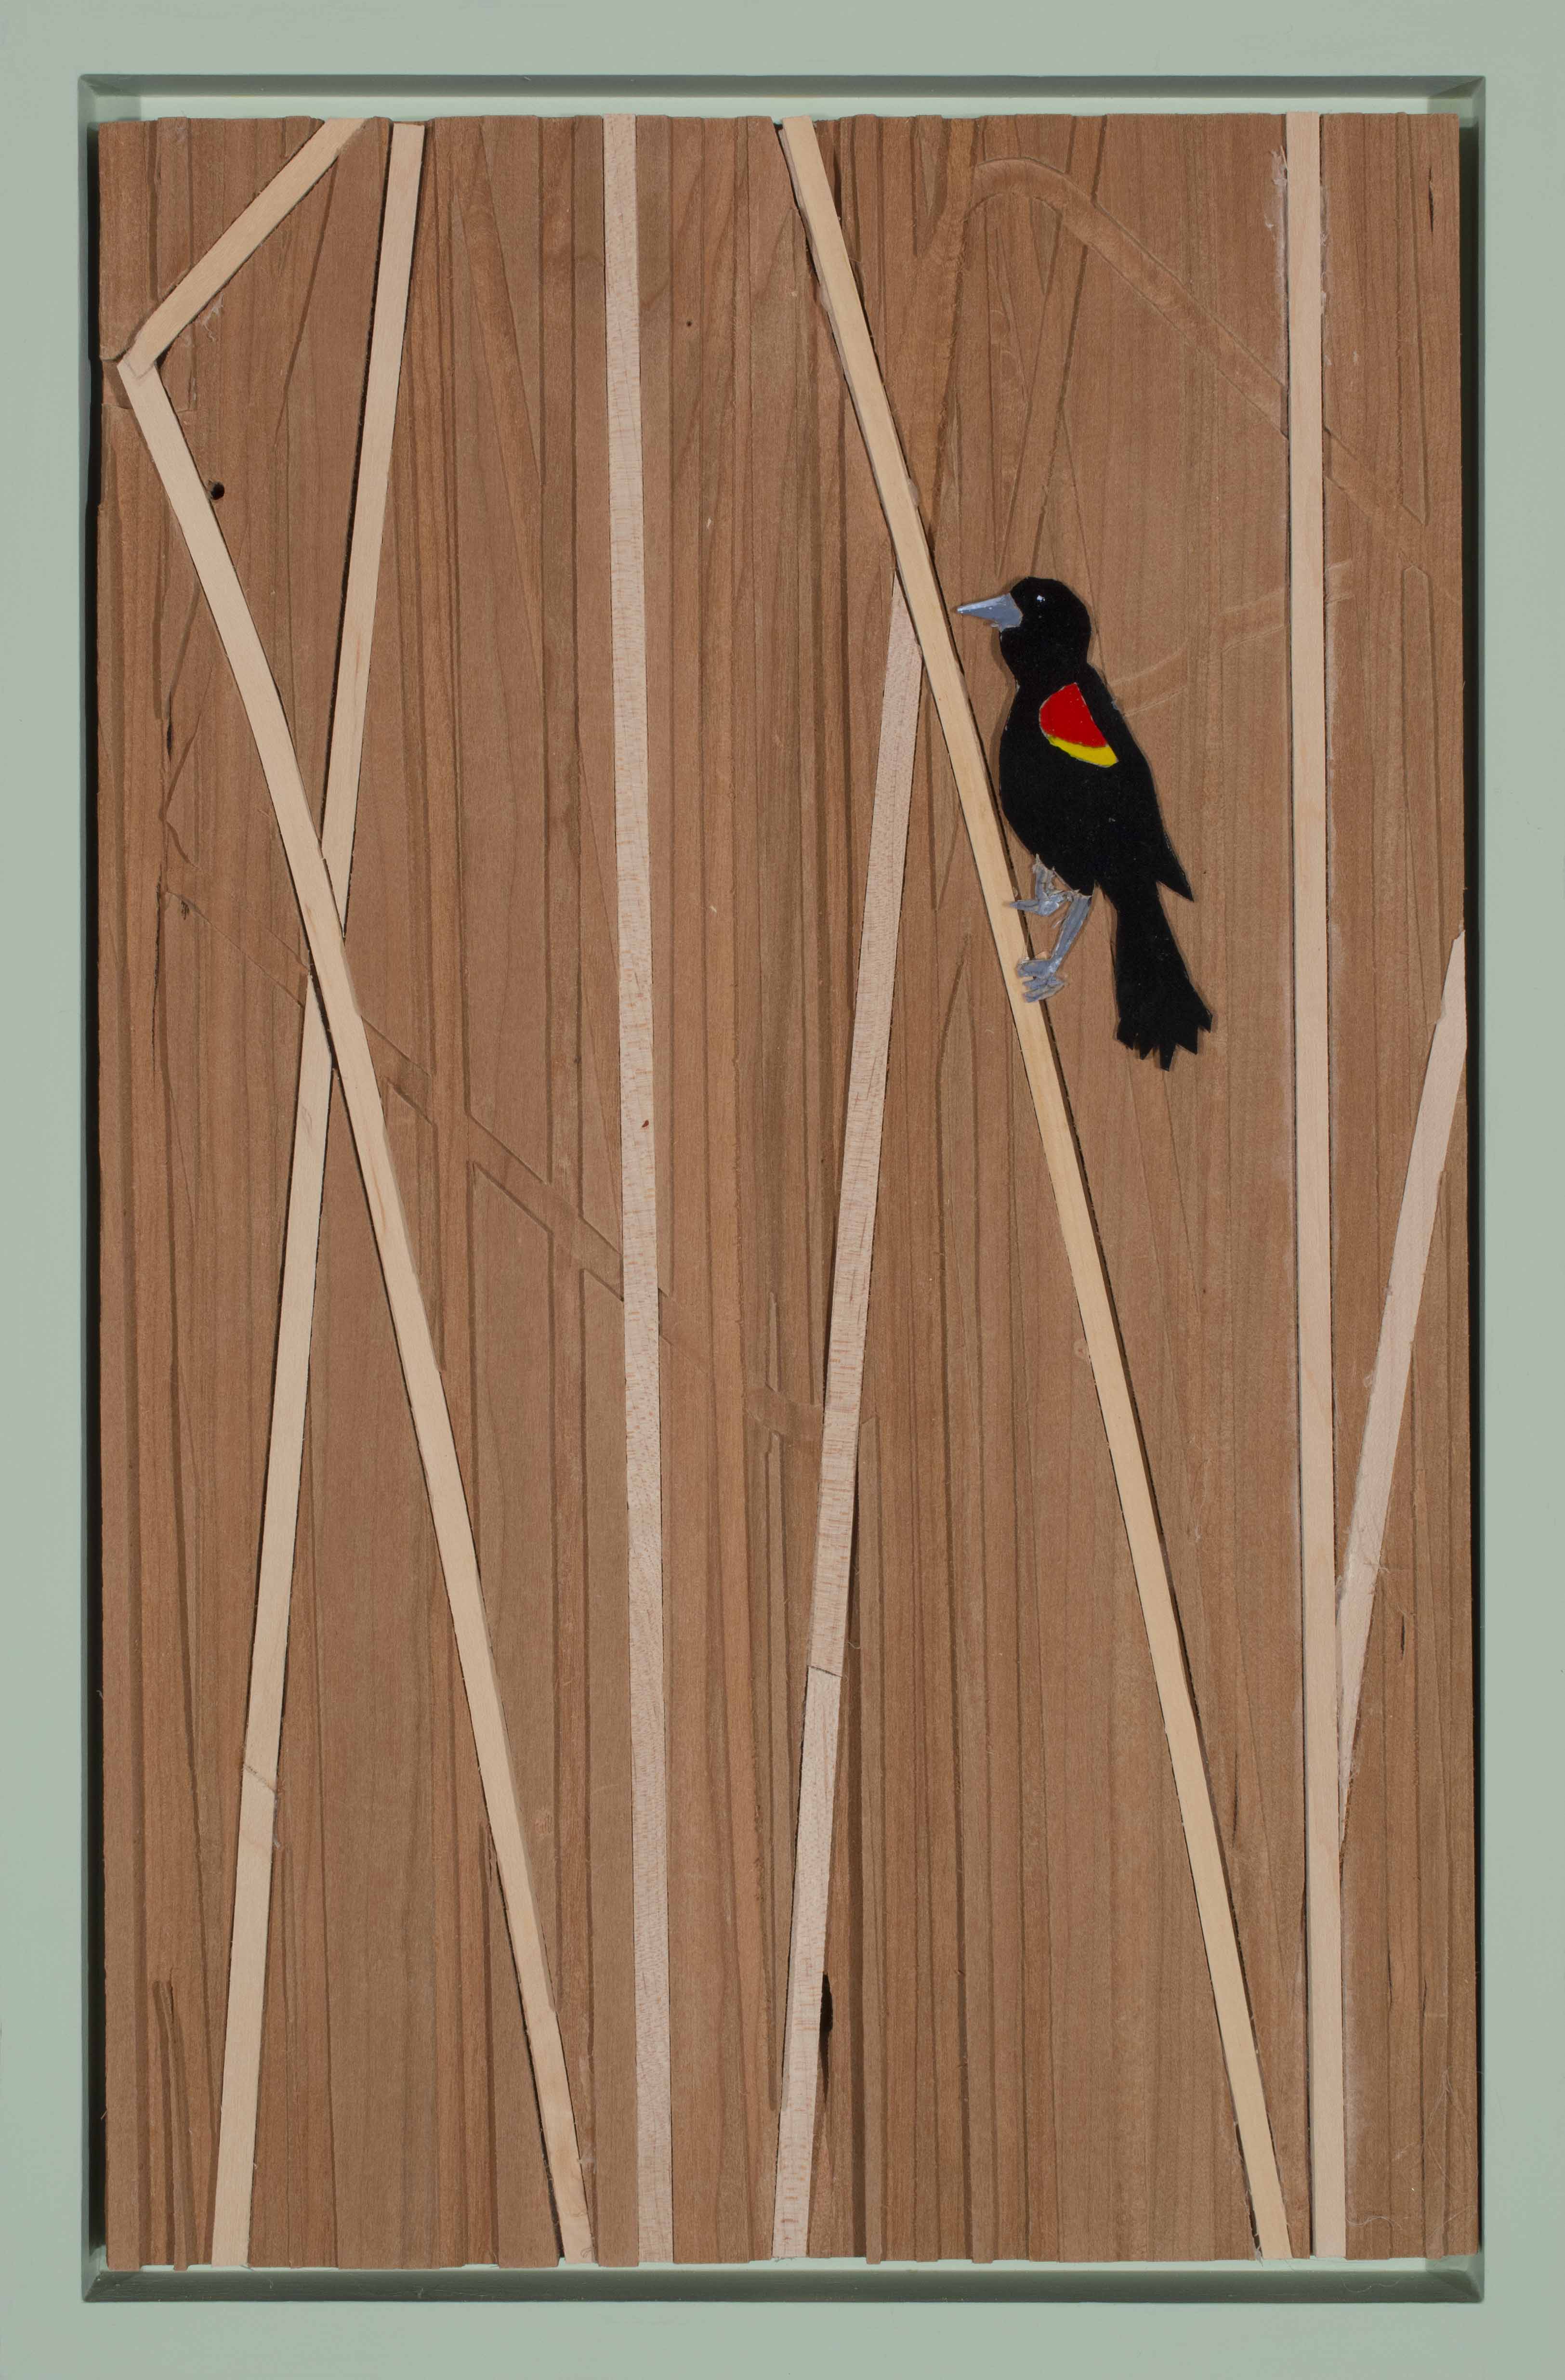 Red-winged Black Bird in Reeds #1, 2018, acrylic and cardboard on wood, 18 x 12 inches